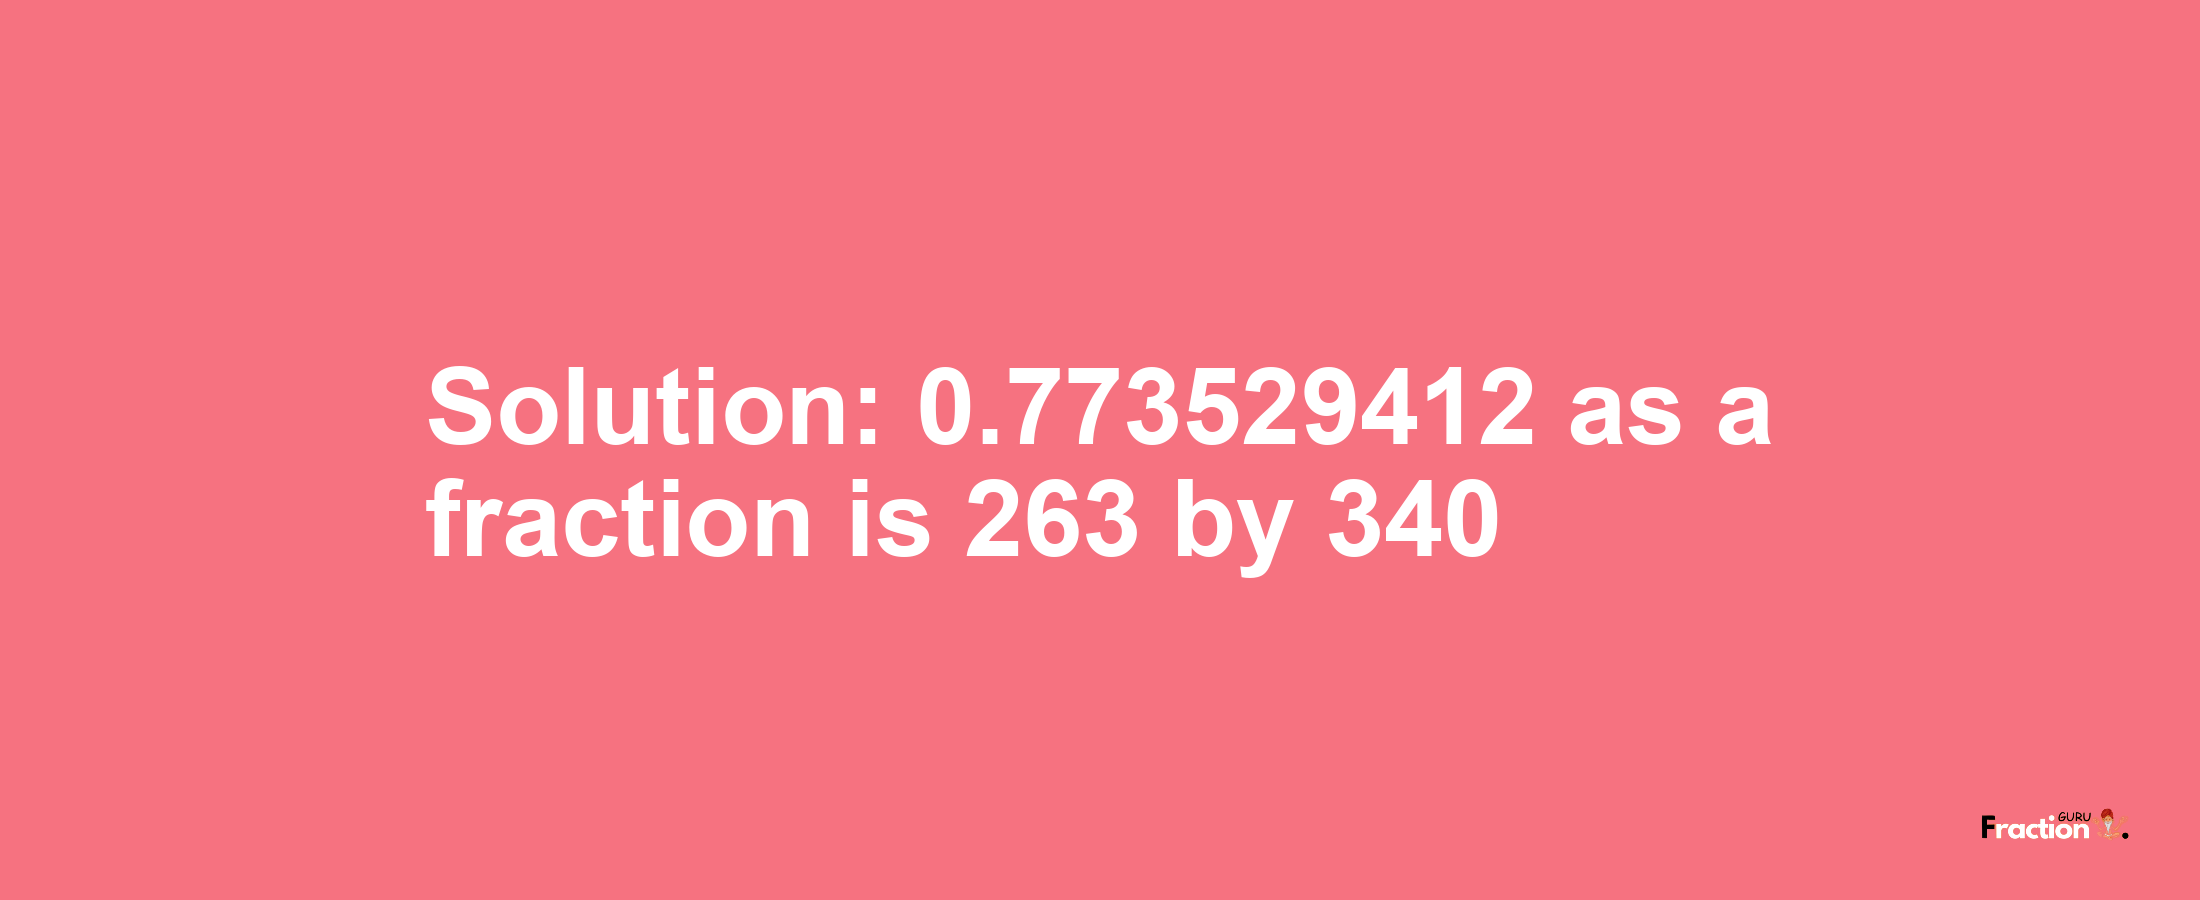 Solution:0.773529412 as a fraction is 263/340